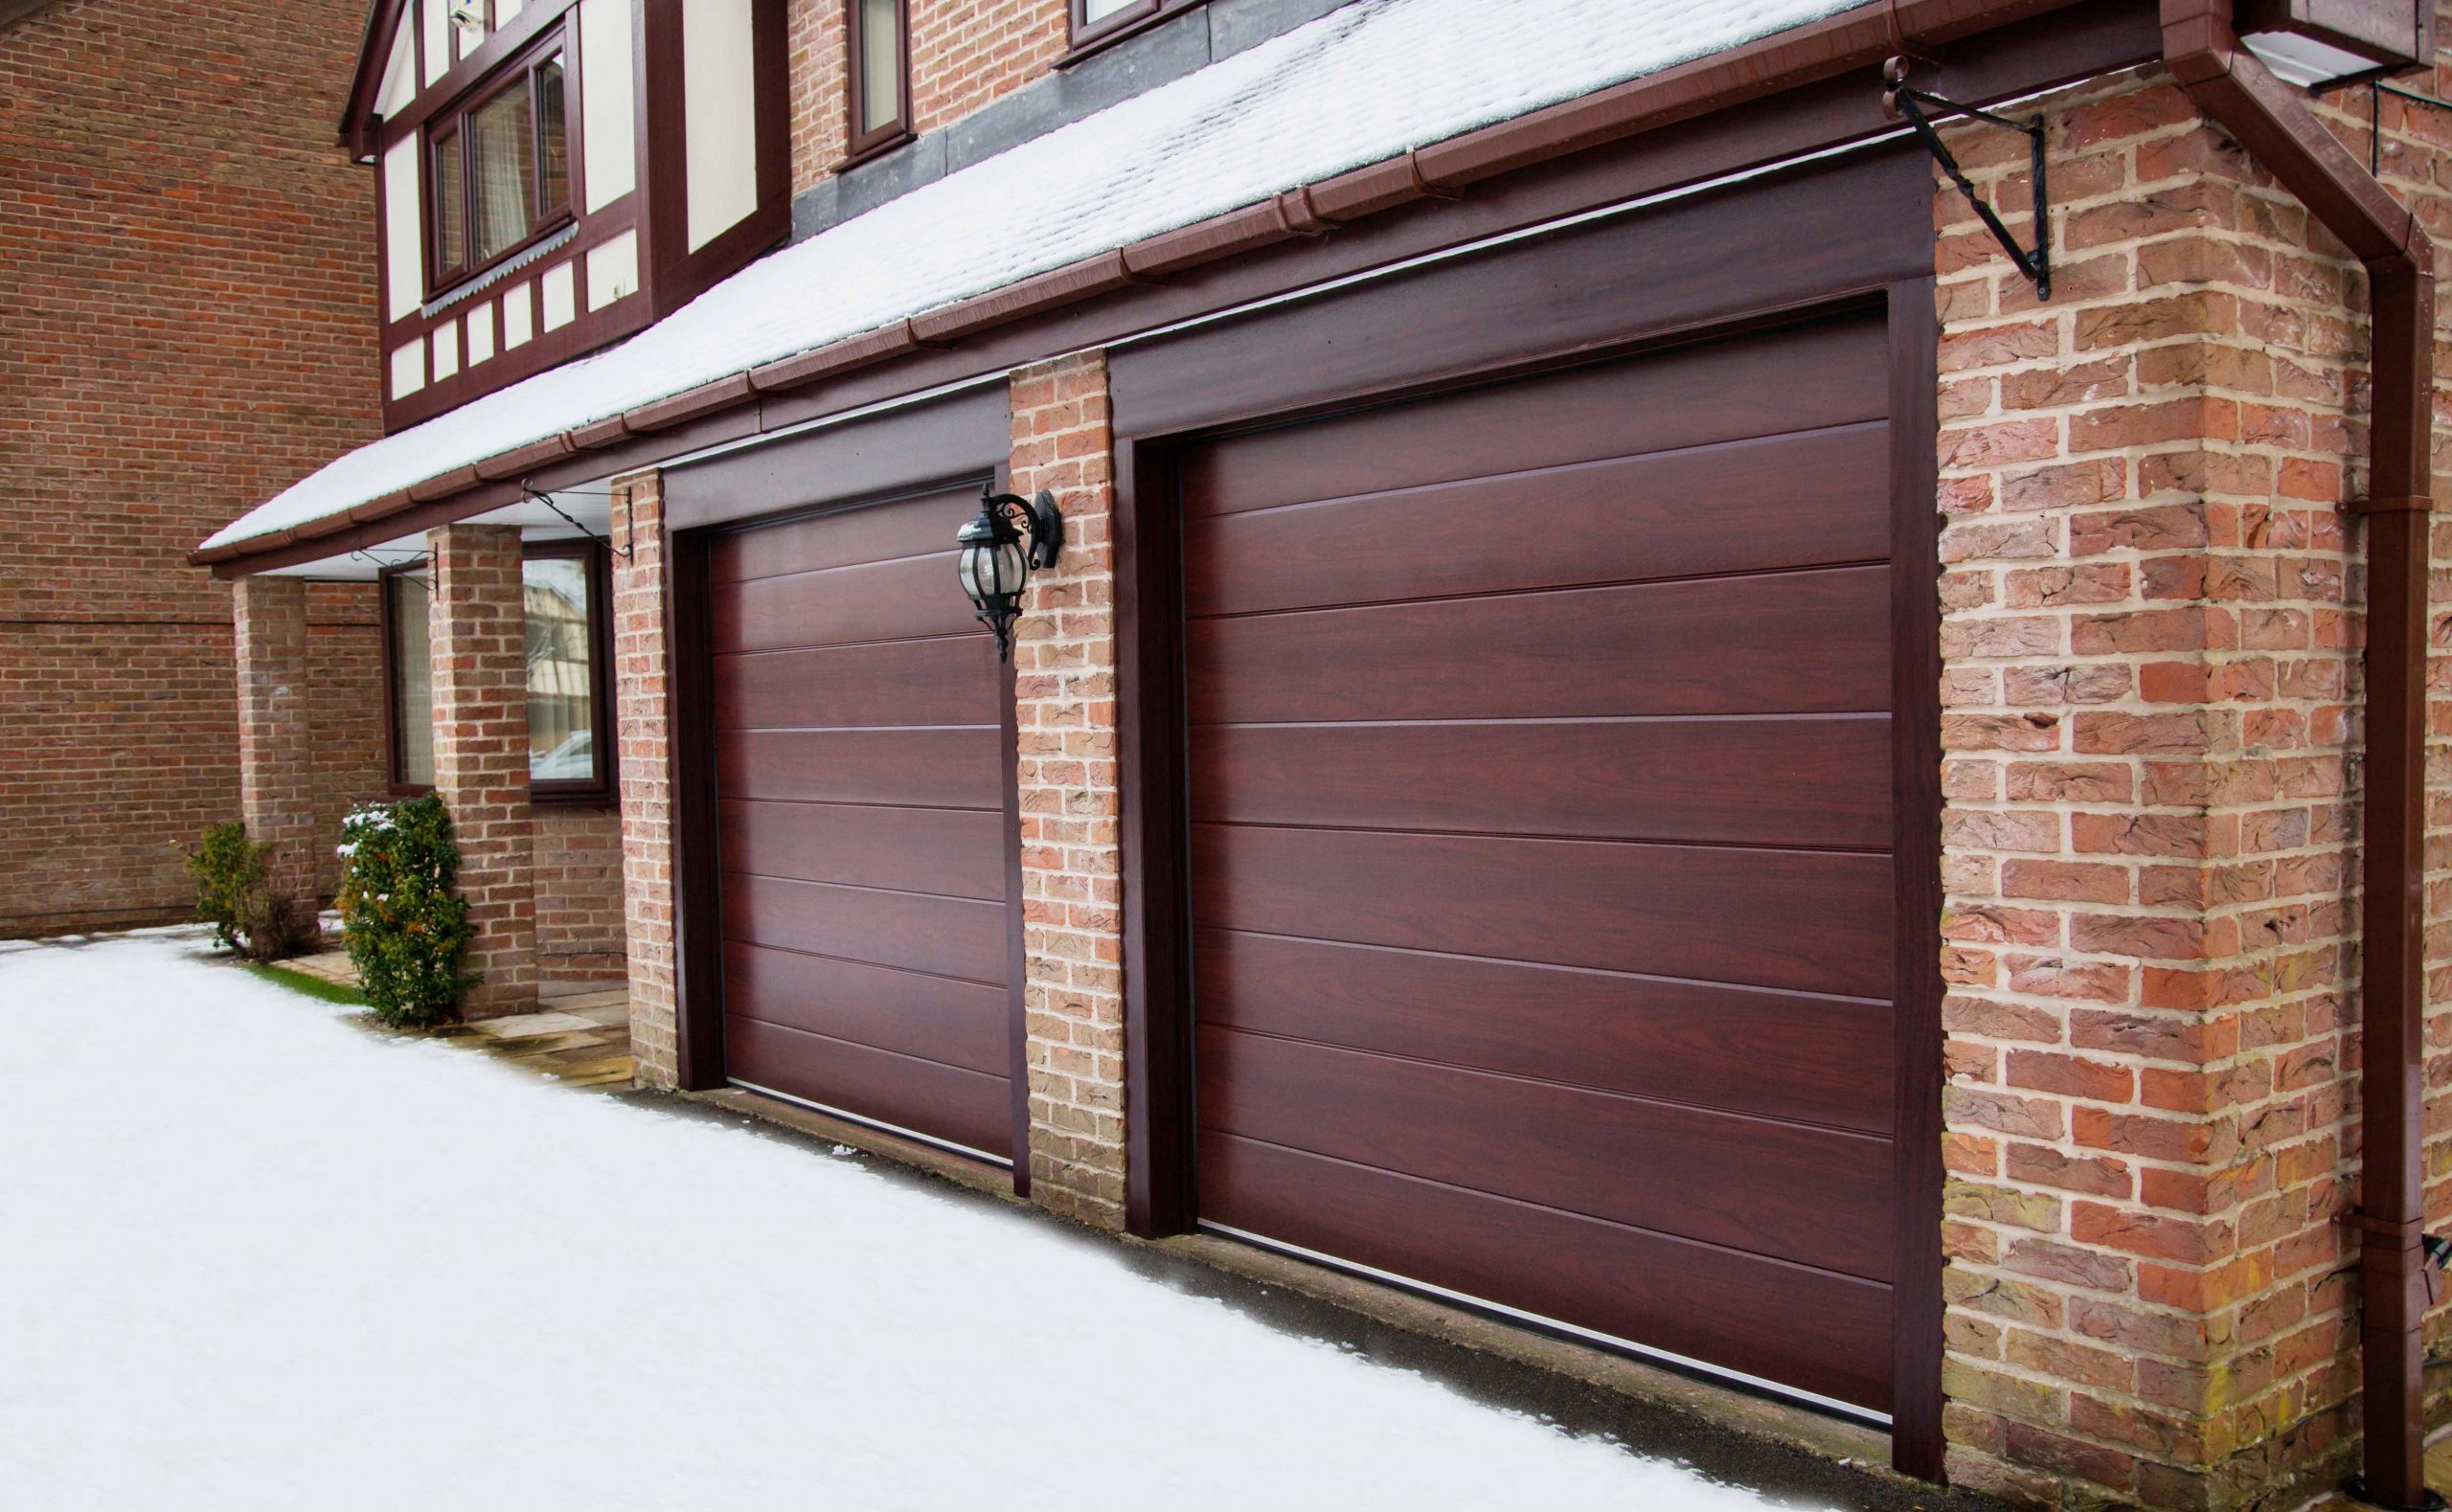 Latest How Much Should A Garage Door Repair Cost with Simple Design